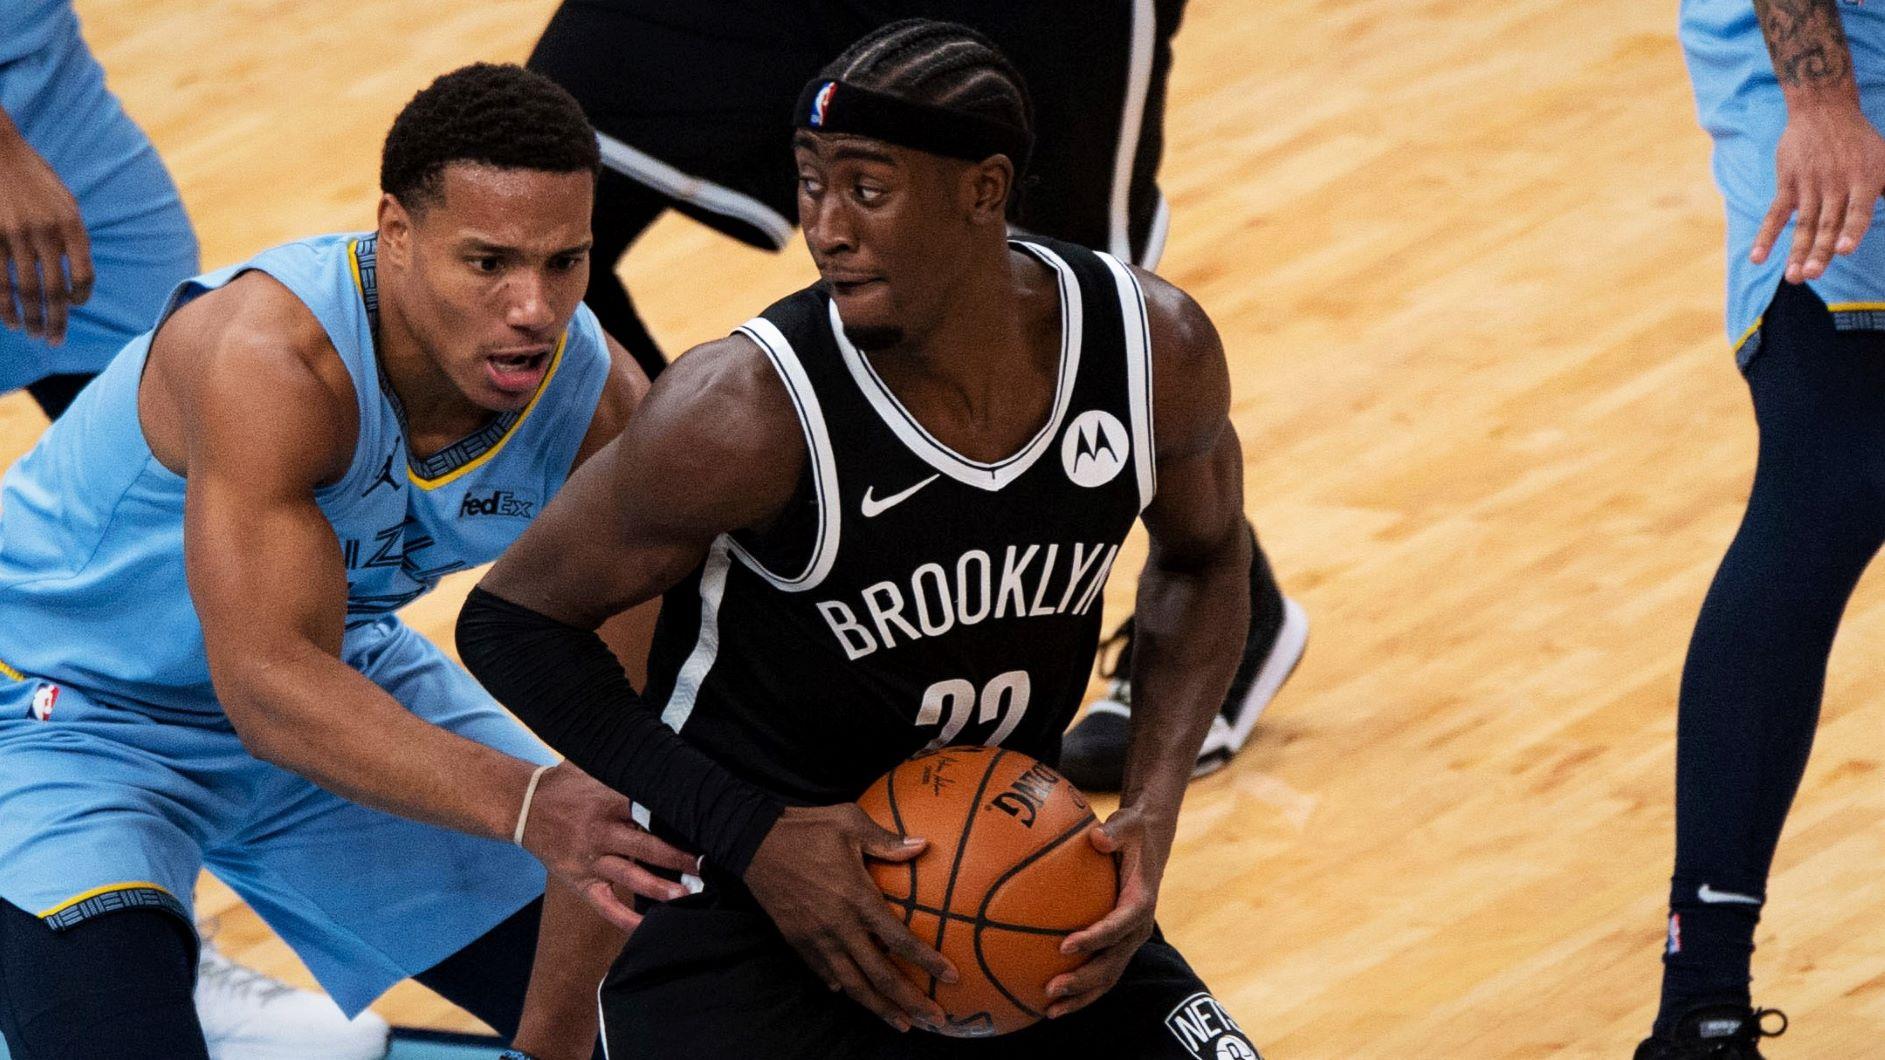 Jan 8, 2021; Memphis, Tennessee, USA; Brooklyn Nets guard Caris LeVert (22) handles the ball against Memphis Grizzlies guard Desmond Bane (22) during the first half at FedExForum. / Justin Ford-USA TODAY Sports